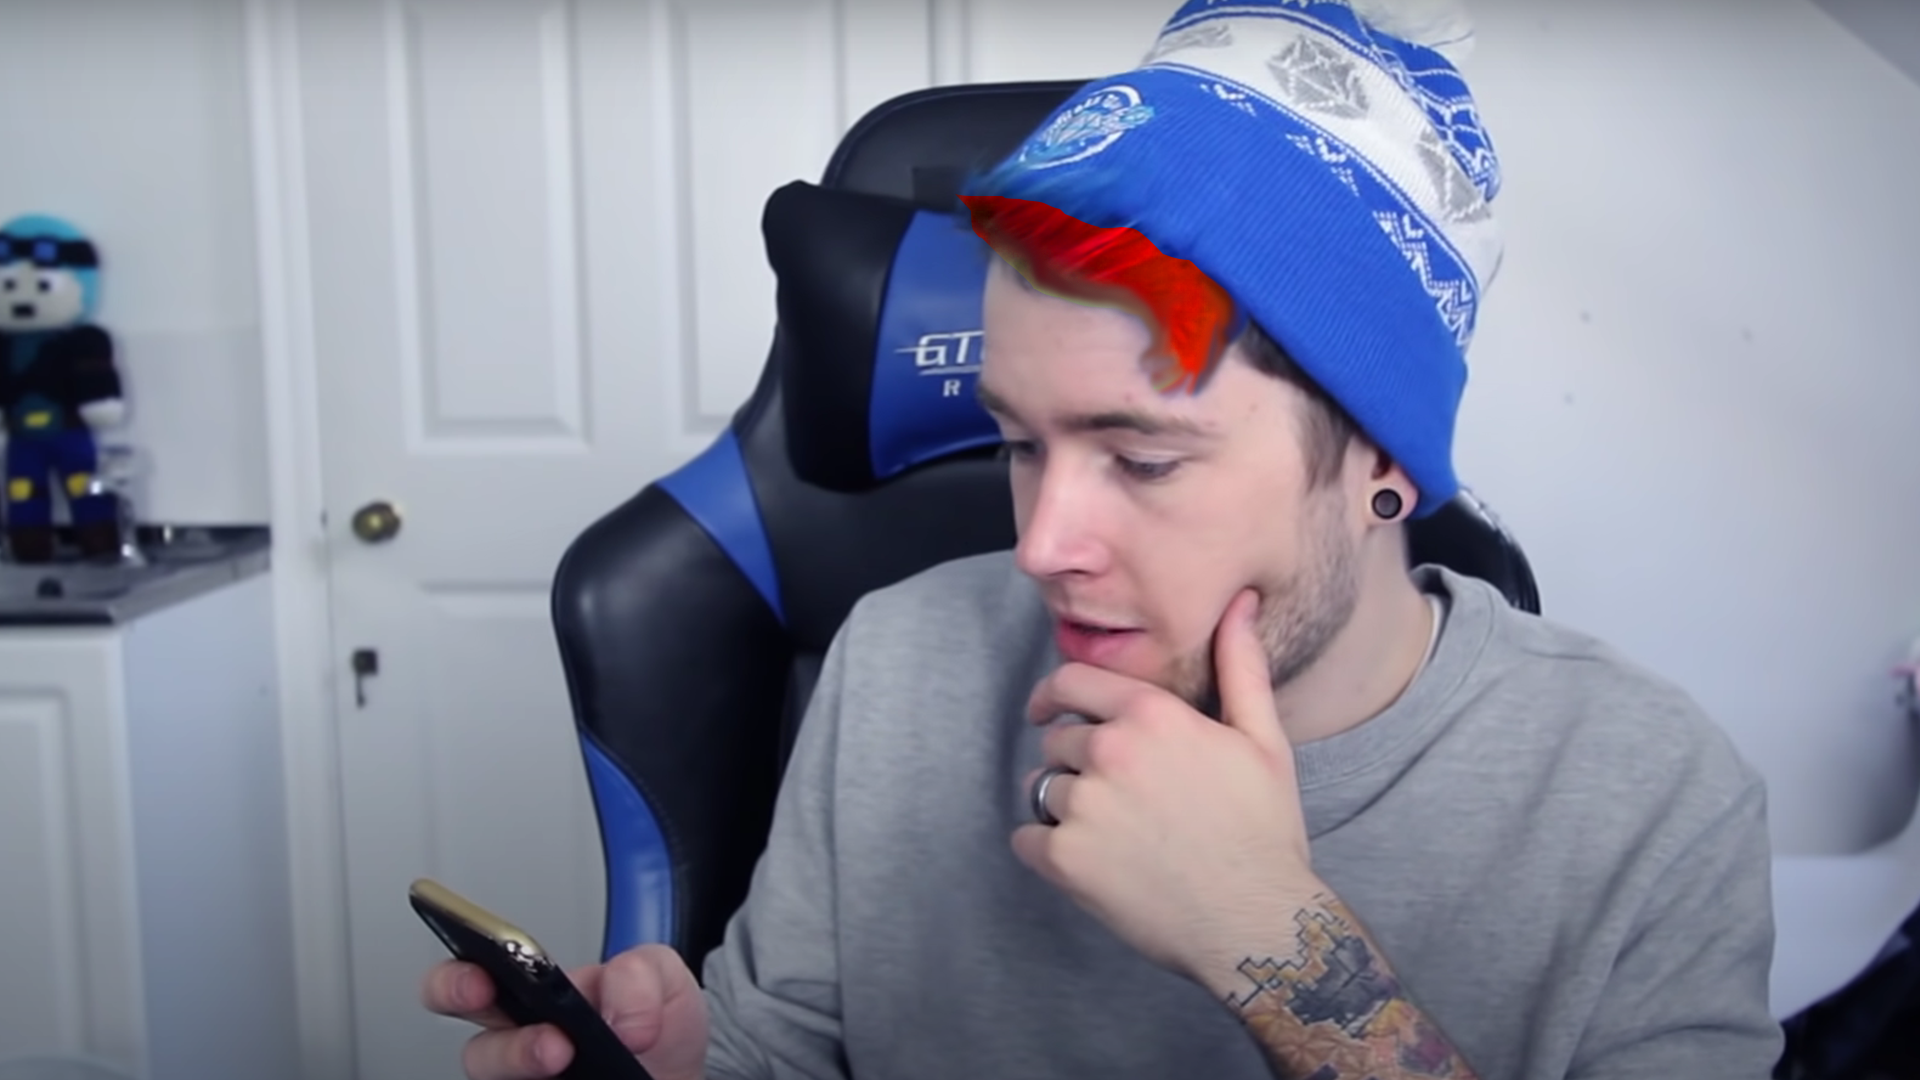 2. How to Achieve Dantdm's Iconic Blue Hair Look - wide 10